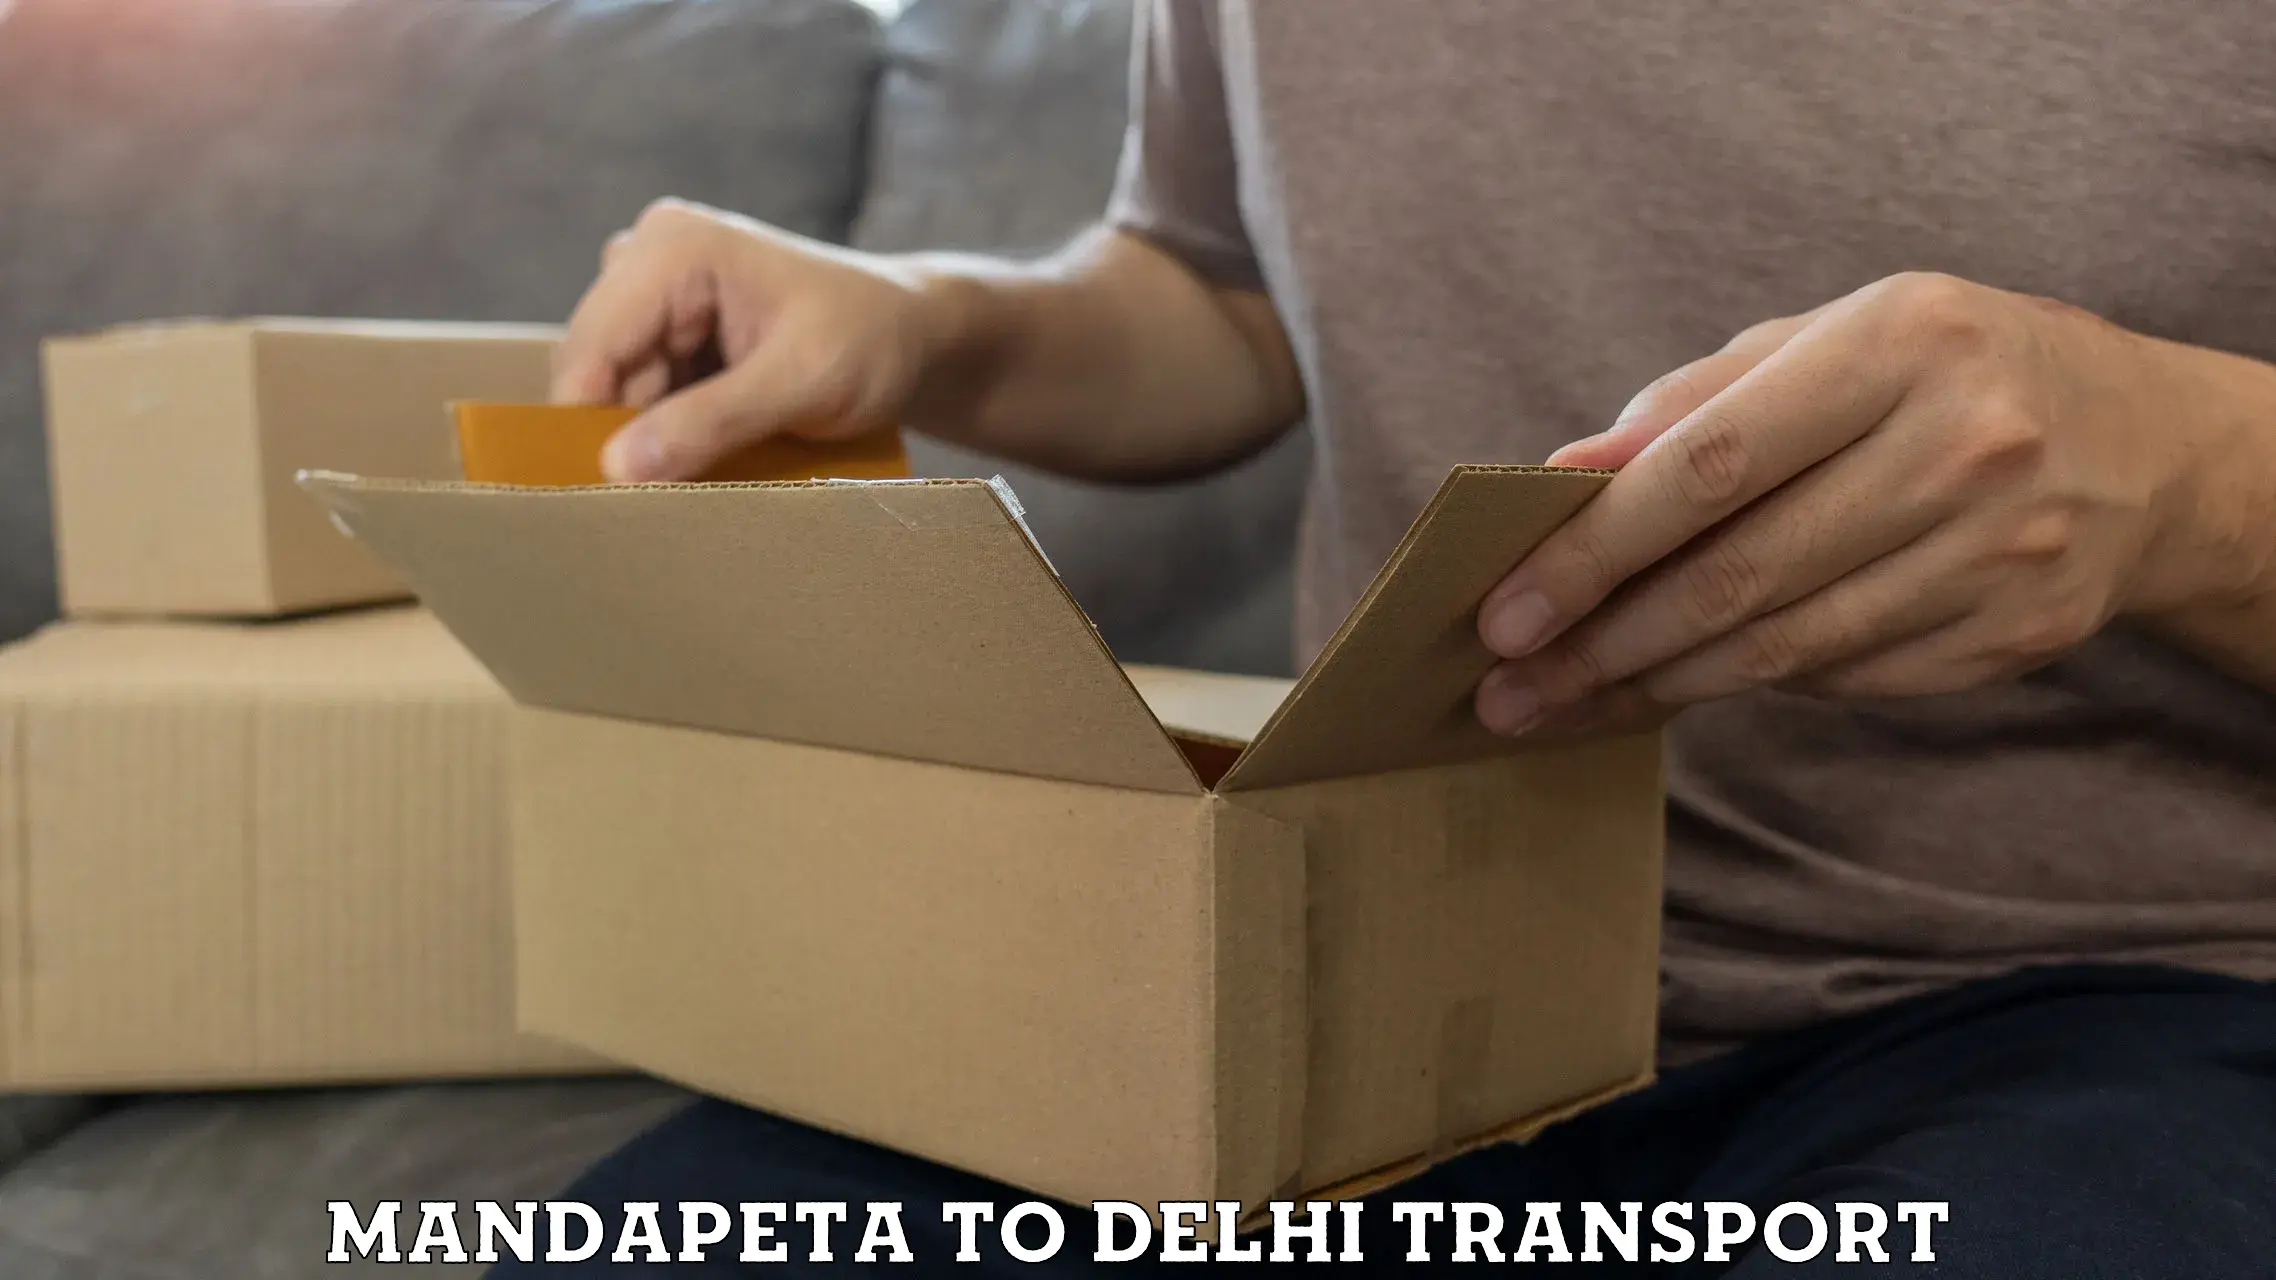 Transport bike from one state to another Mandapeta to Delhi